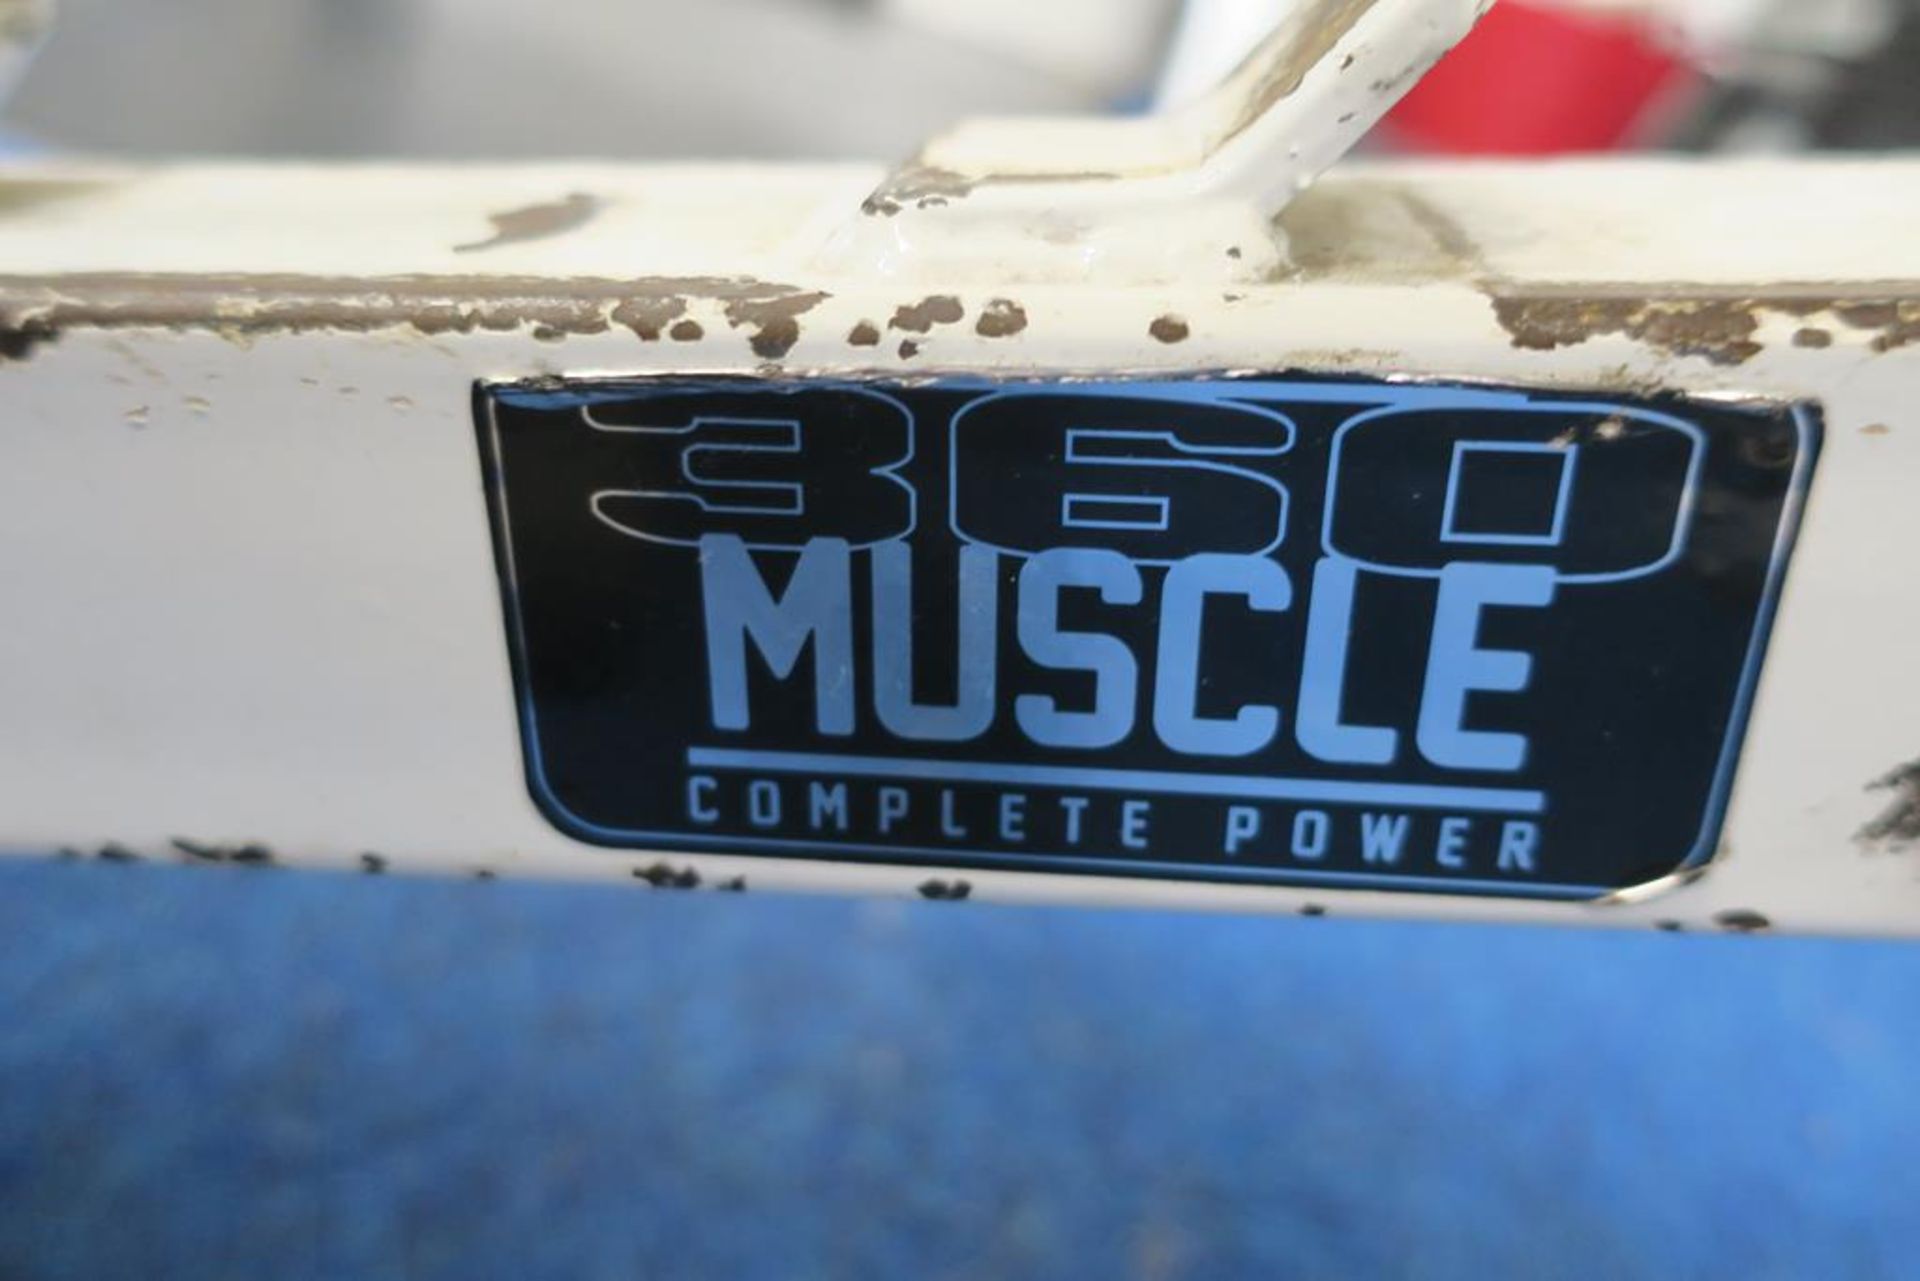 360 Muscle Adjustable Bench - Image 4 of 4